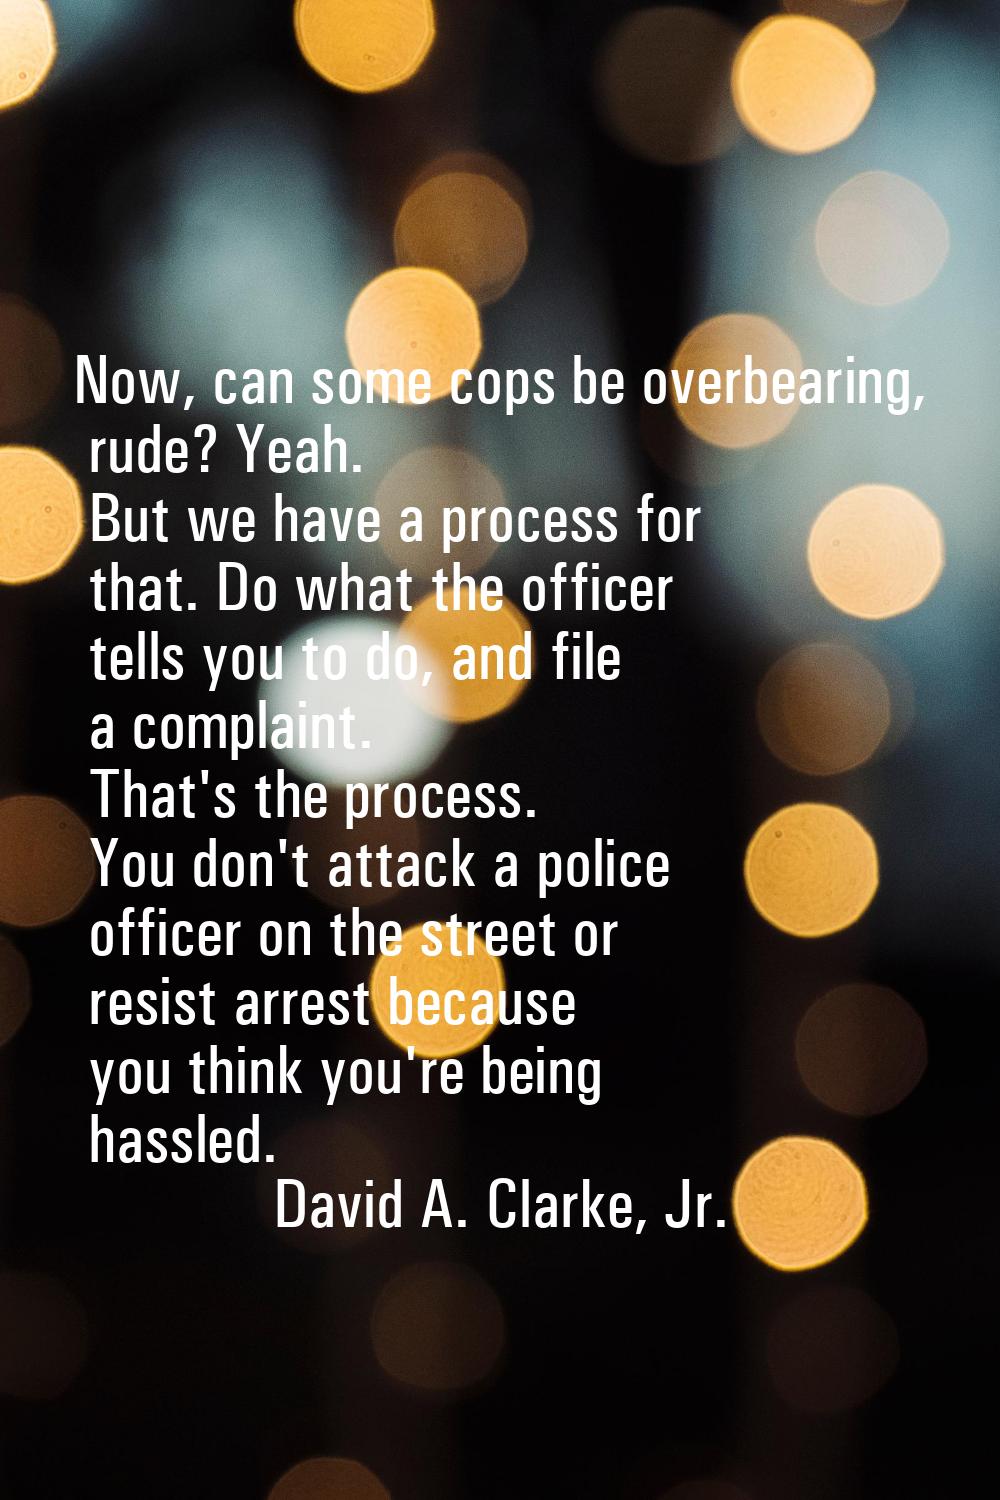 Now, can some cops be overbearing, rude? Yeah. But we have a process for that. Do what the officer 